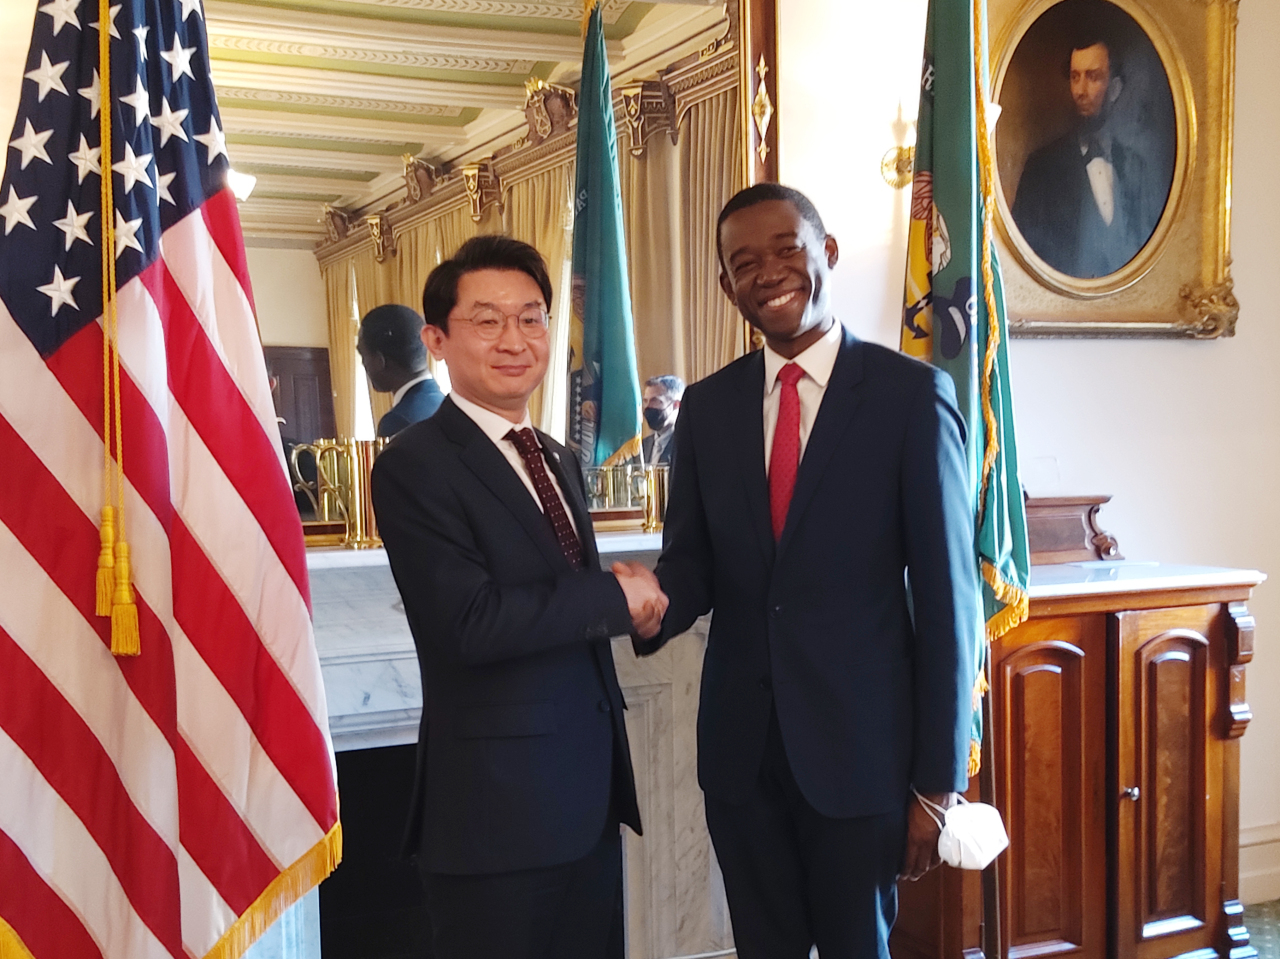 Korea's Vice Finance Minister Lee Eog-weon (left) poses with US Deputy Treasury Secretary Wally Adeyemo during their meeting to discuss matters involving Korea's financial sanctions on Russia in Washington, D.C. on Monday. (Yonhap)